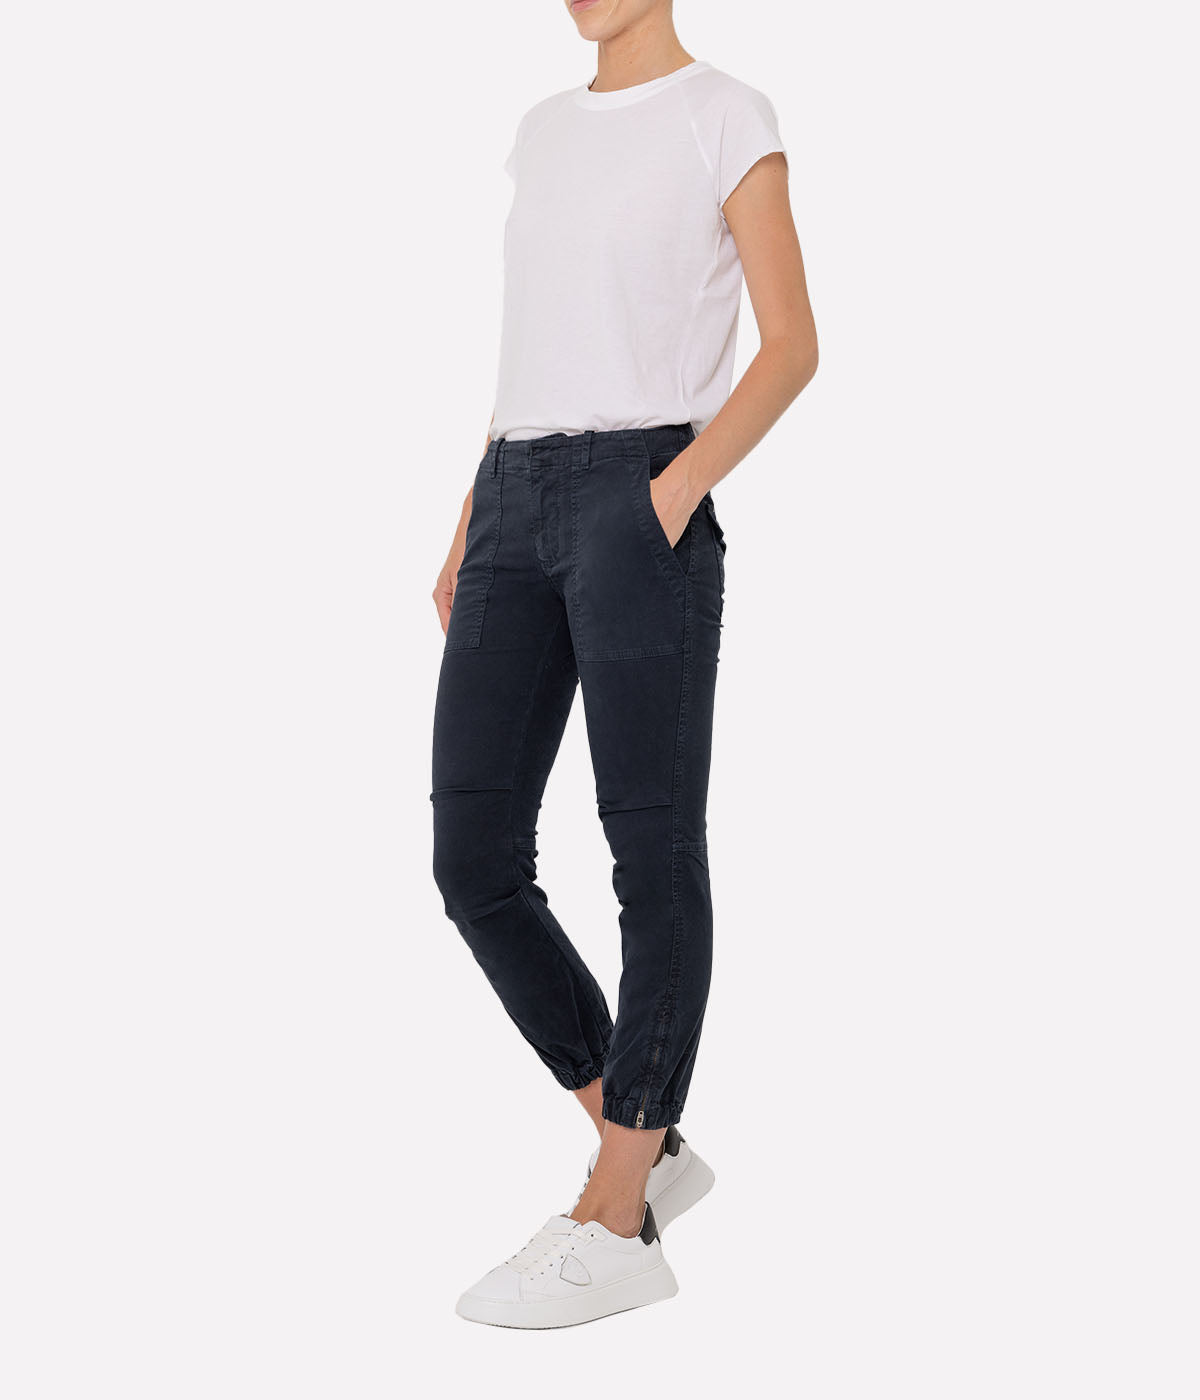 Cropped Military Pant in Dark Navy